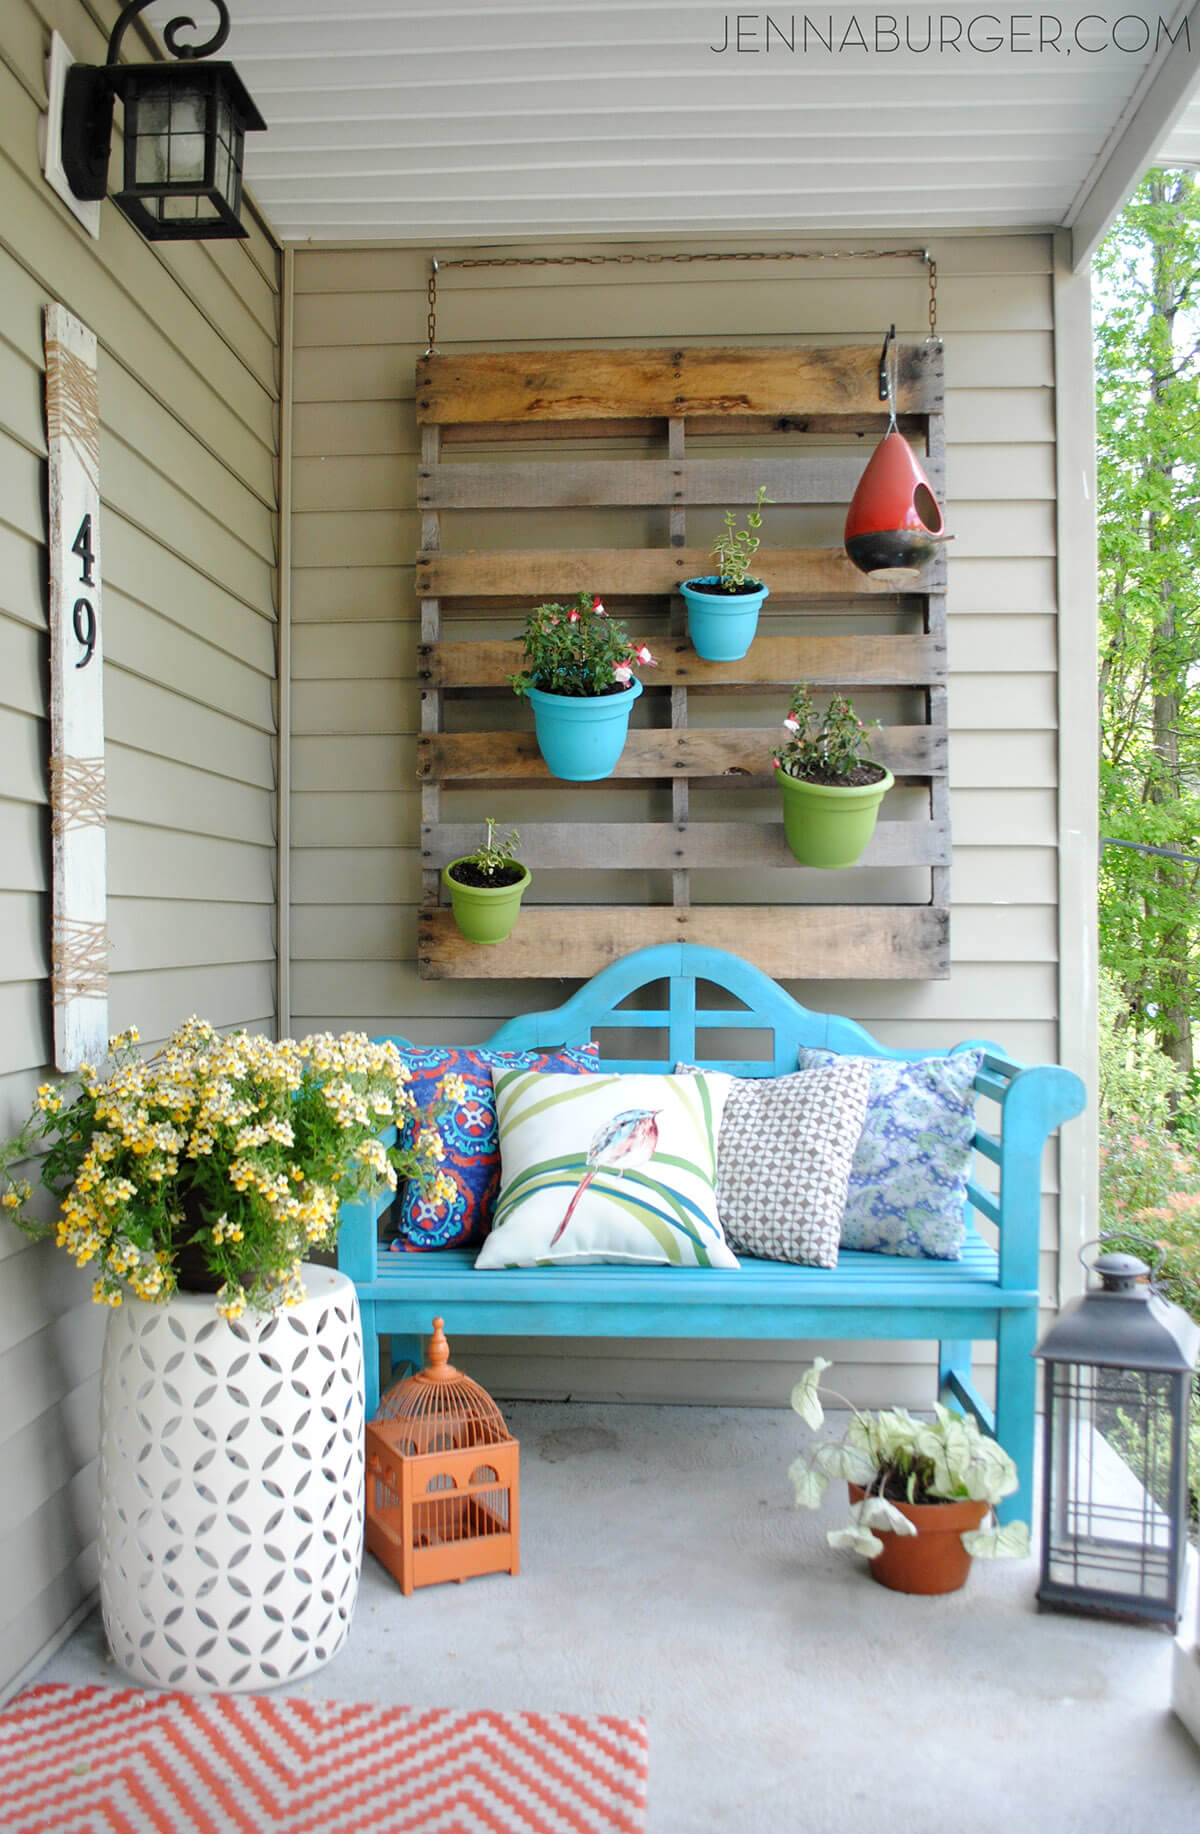 Pallet Hanging from the Wall with Flowers